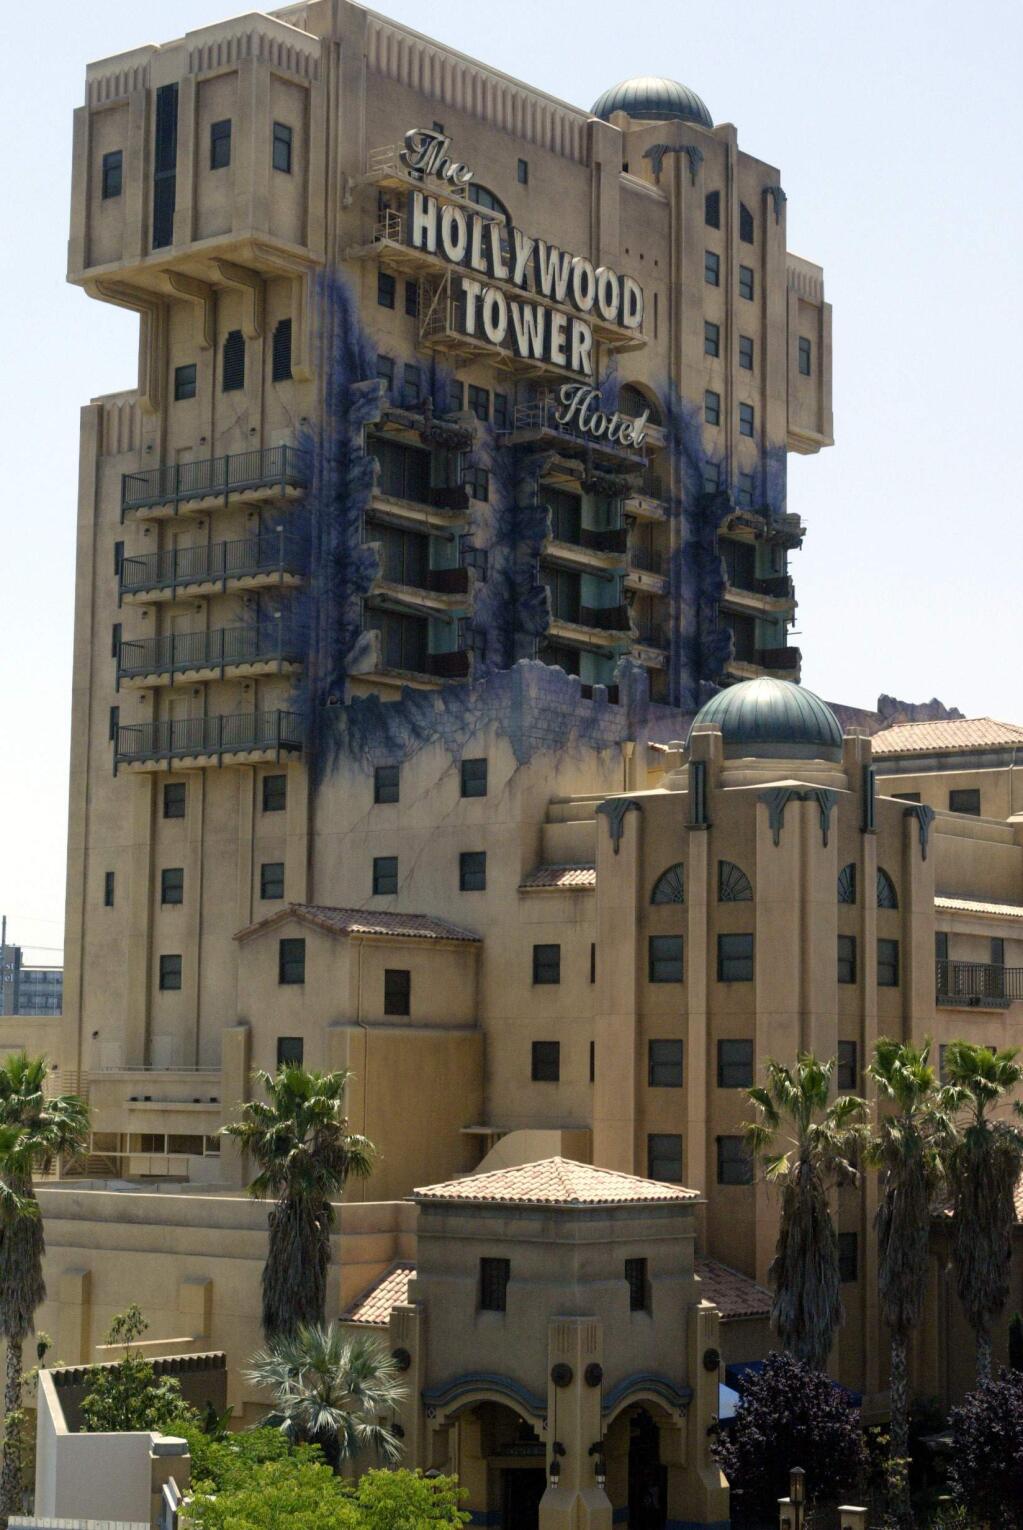 FILE - In this May 4, 2004, file photo, The Twilight Zone Tower of Terror ride at the Disneyland Resort is seen in Anaheim, Calif. Some fans are outraged at the decision to close the ride and revamp it into a 'Guardians of the Galaxy' themed attraction. The plan was greeted with boos when it was announced at the San Diego Comic Con in July 2016. (AP Photo/Damian Dovarganes, File)